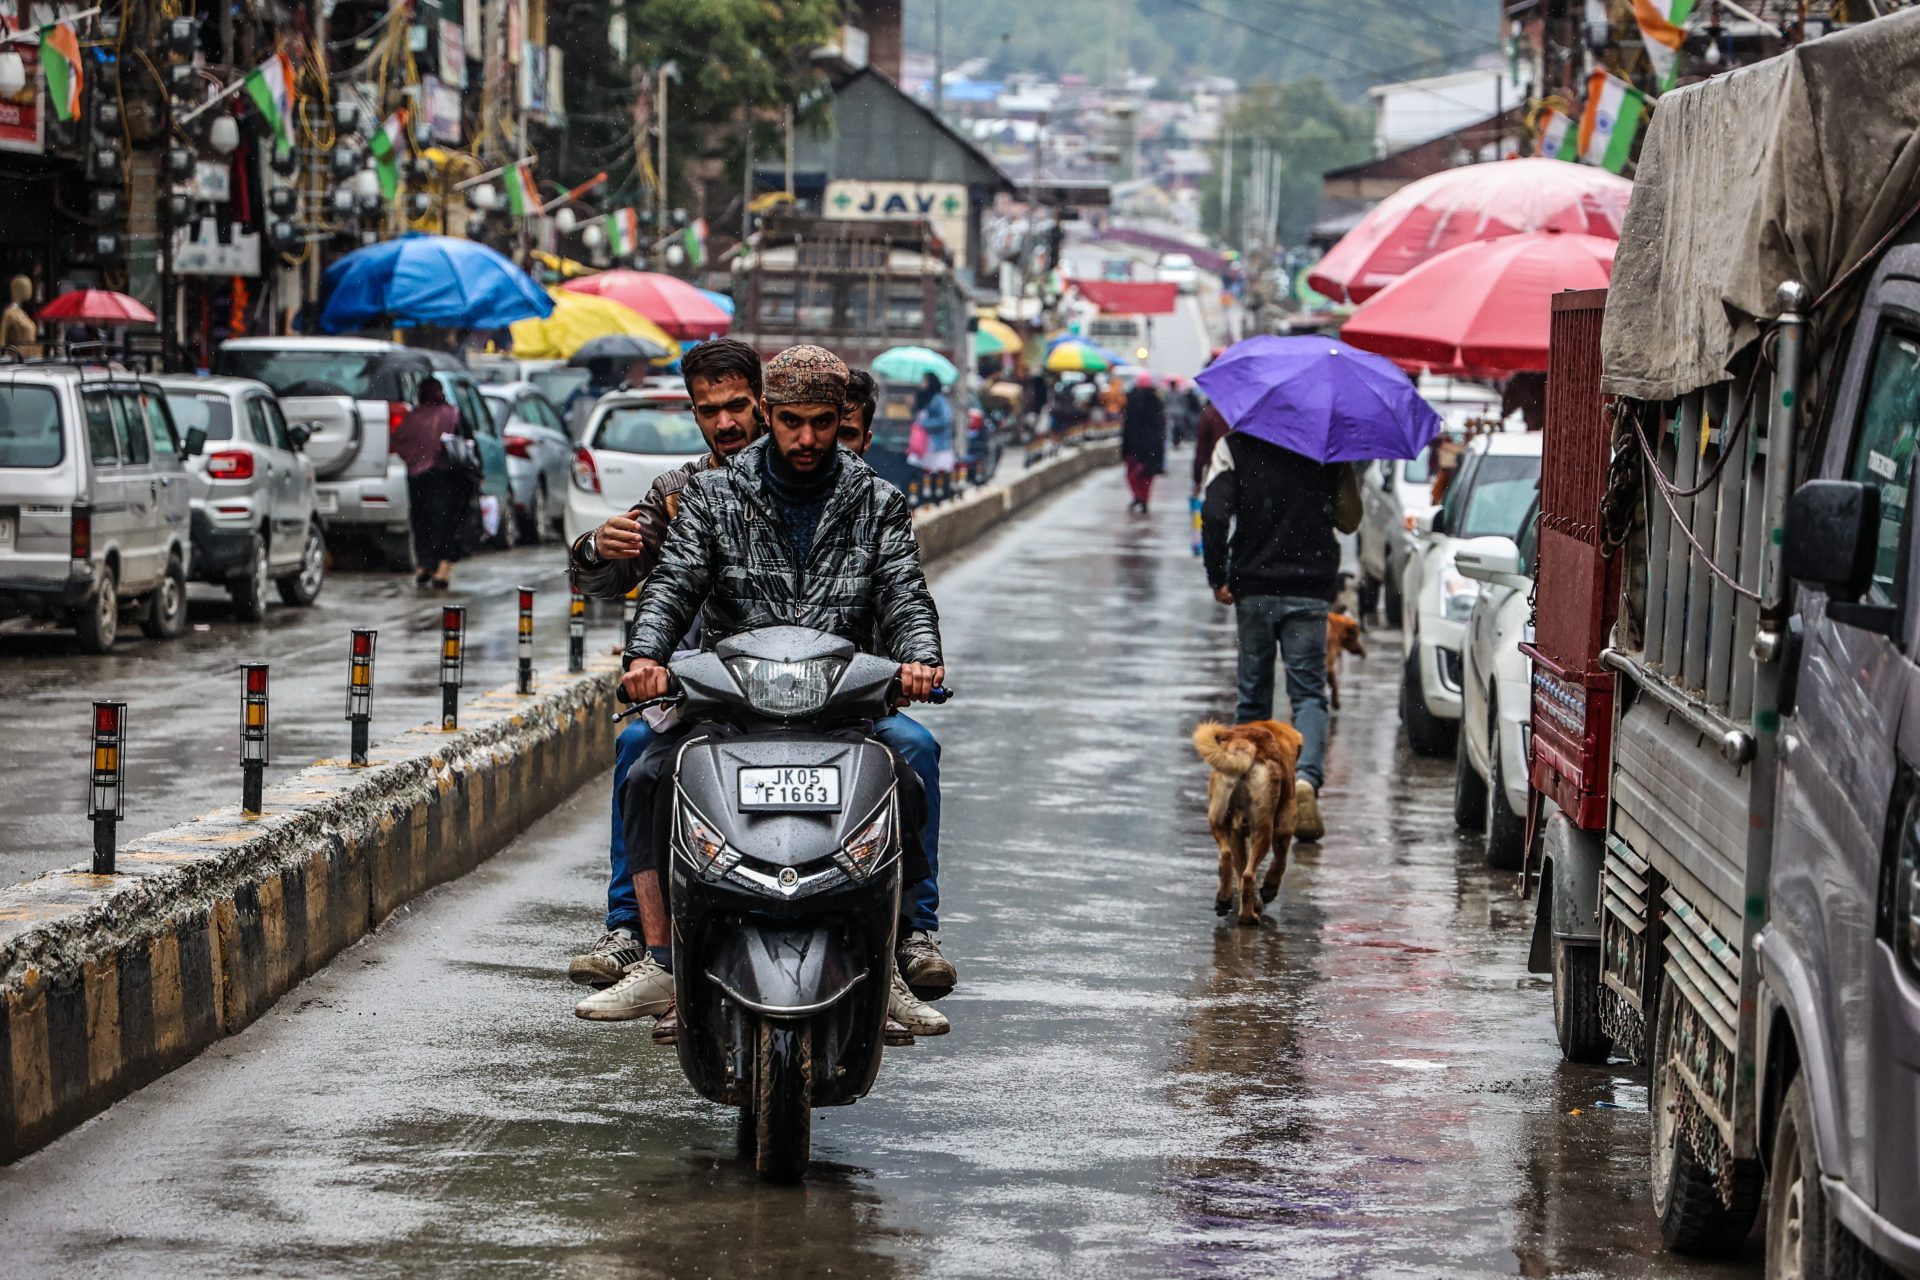 Monsoons for India, flooding in East Africa, drought in South Africa